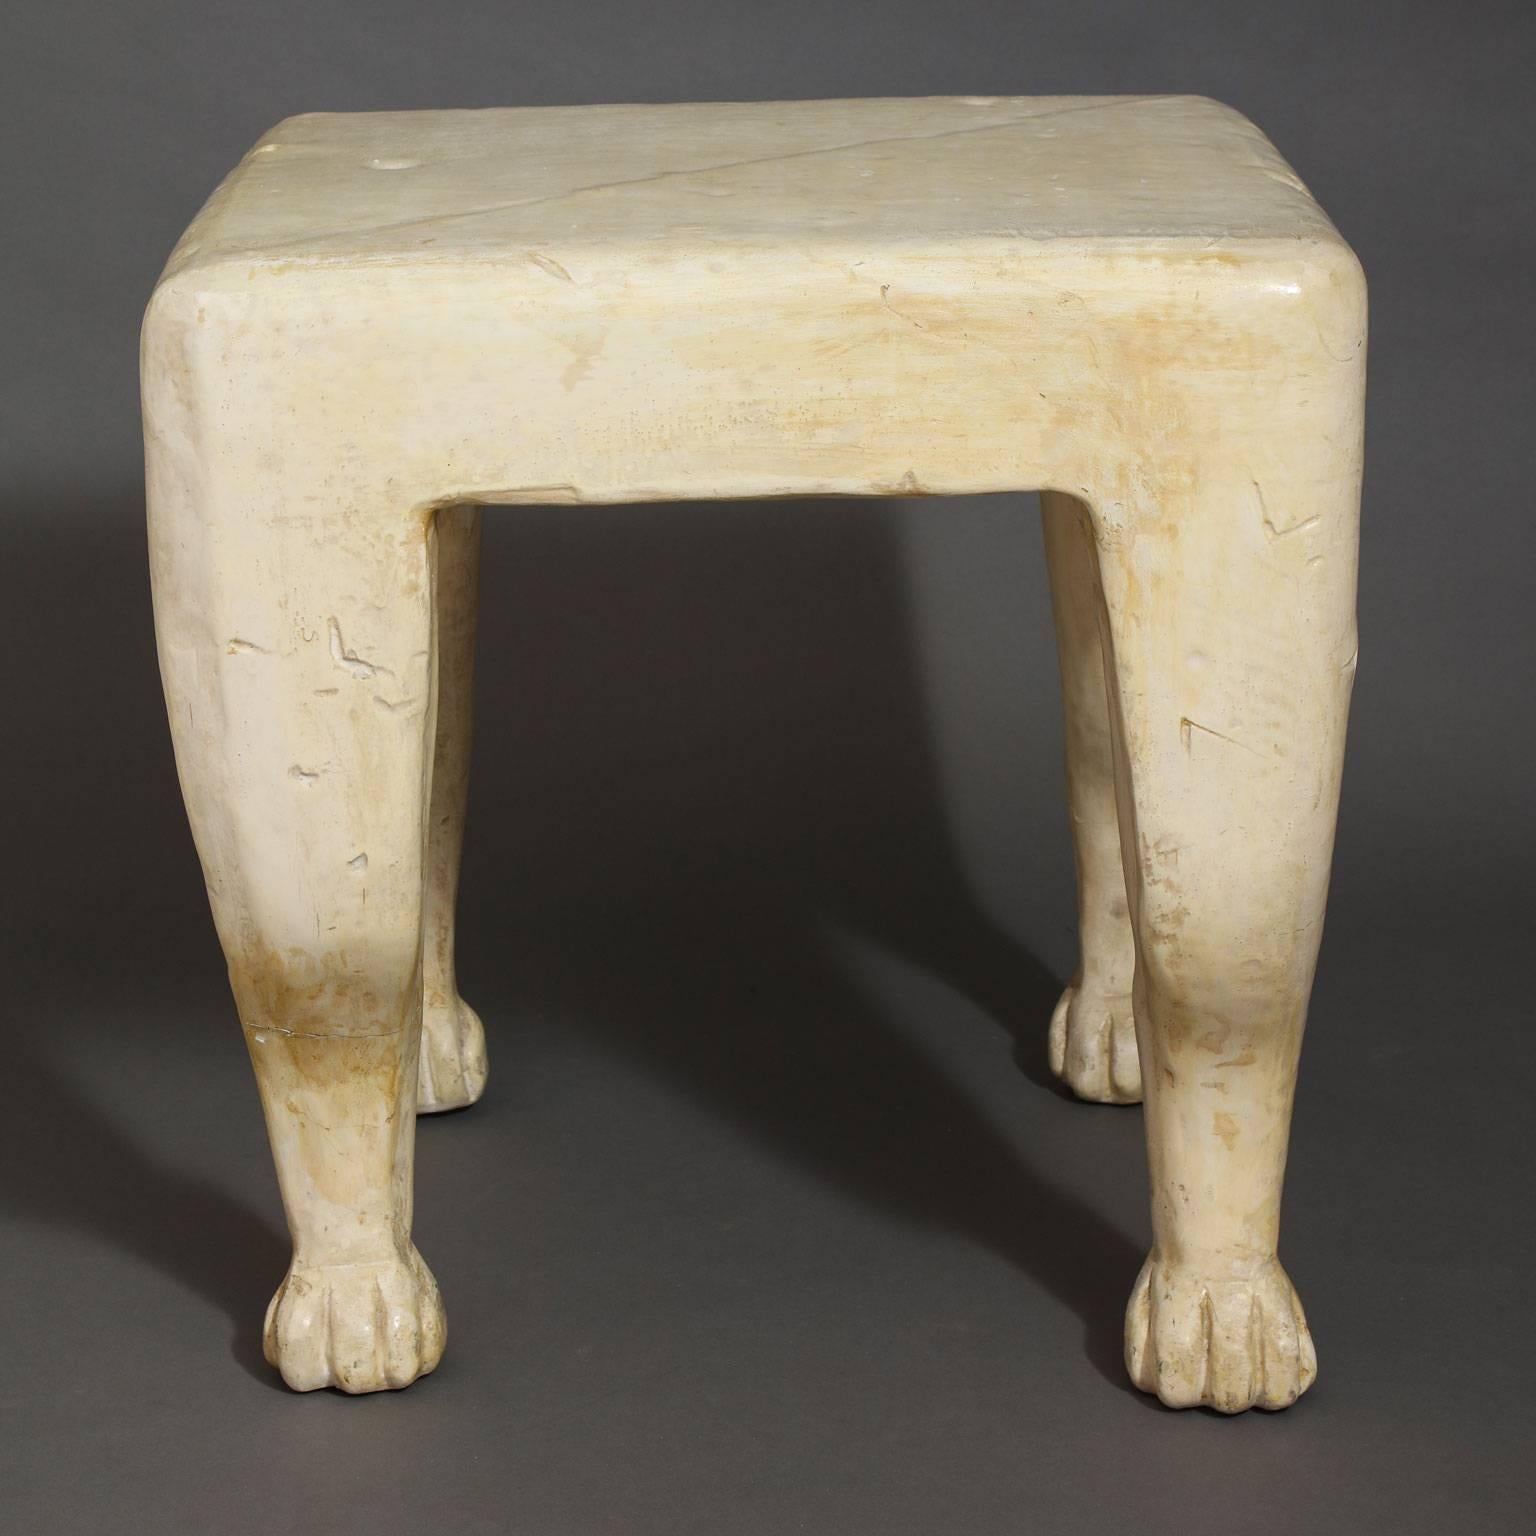 John Dickinson (1920-1982)
“Etruscan” side table in plaster raised on four stylized animal legs.
Signed: John Dickinson/San Francisco.
American, circa 1970.
Measurements: 21”H x 20”W x 20”D.
   